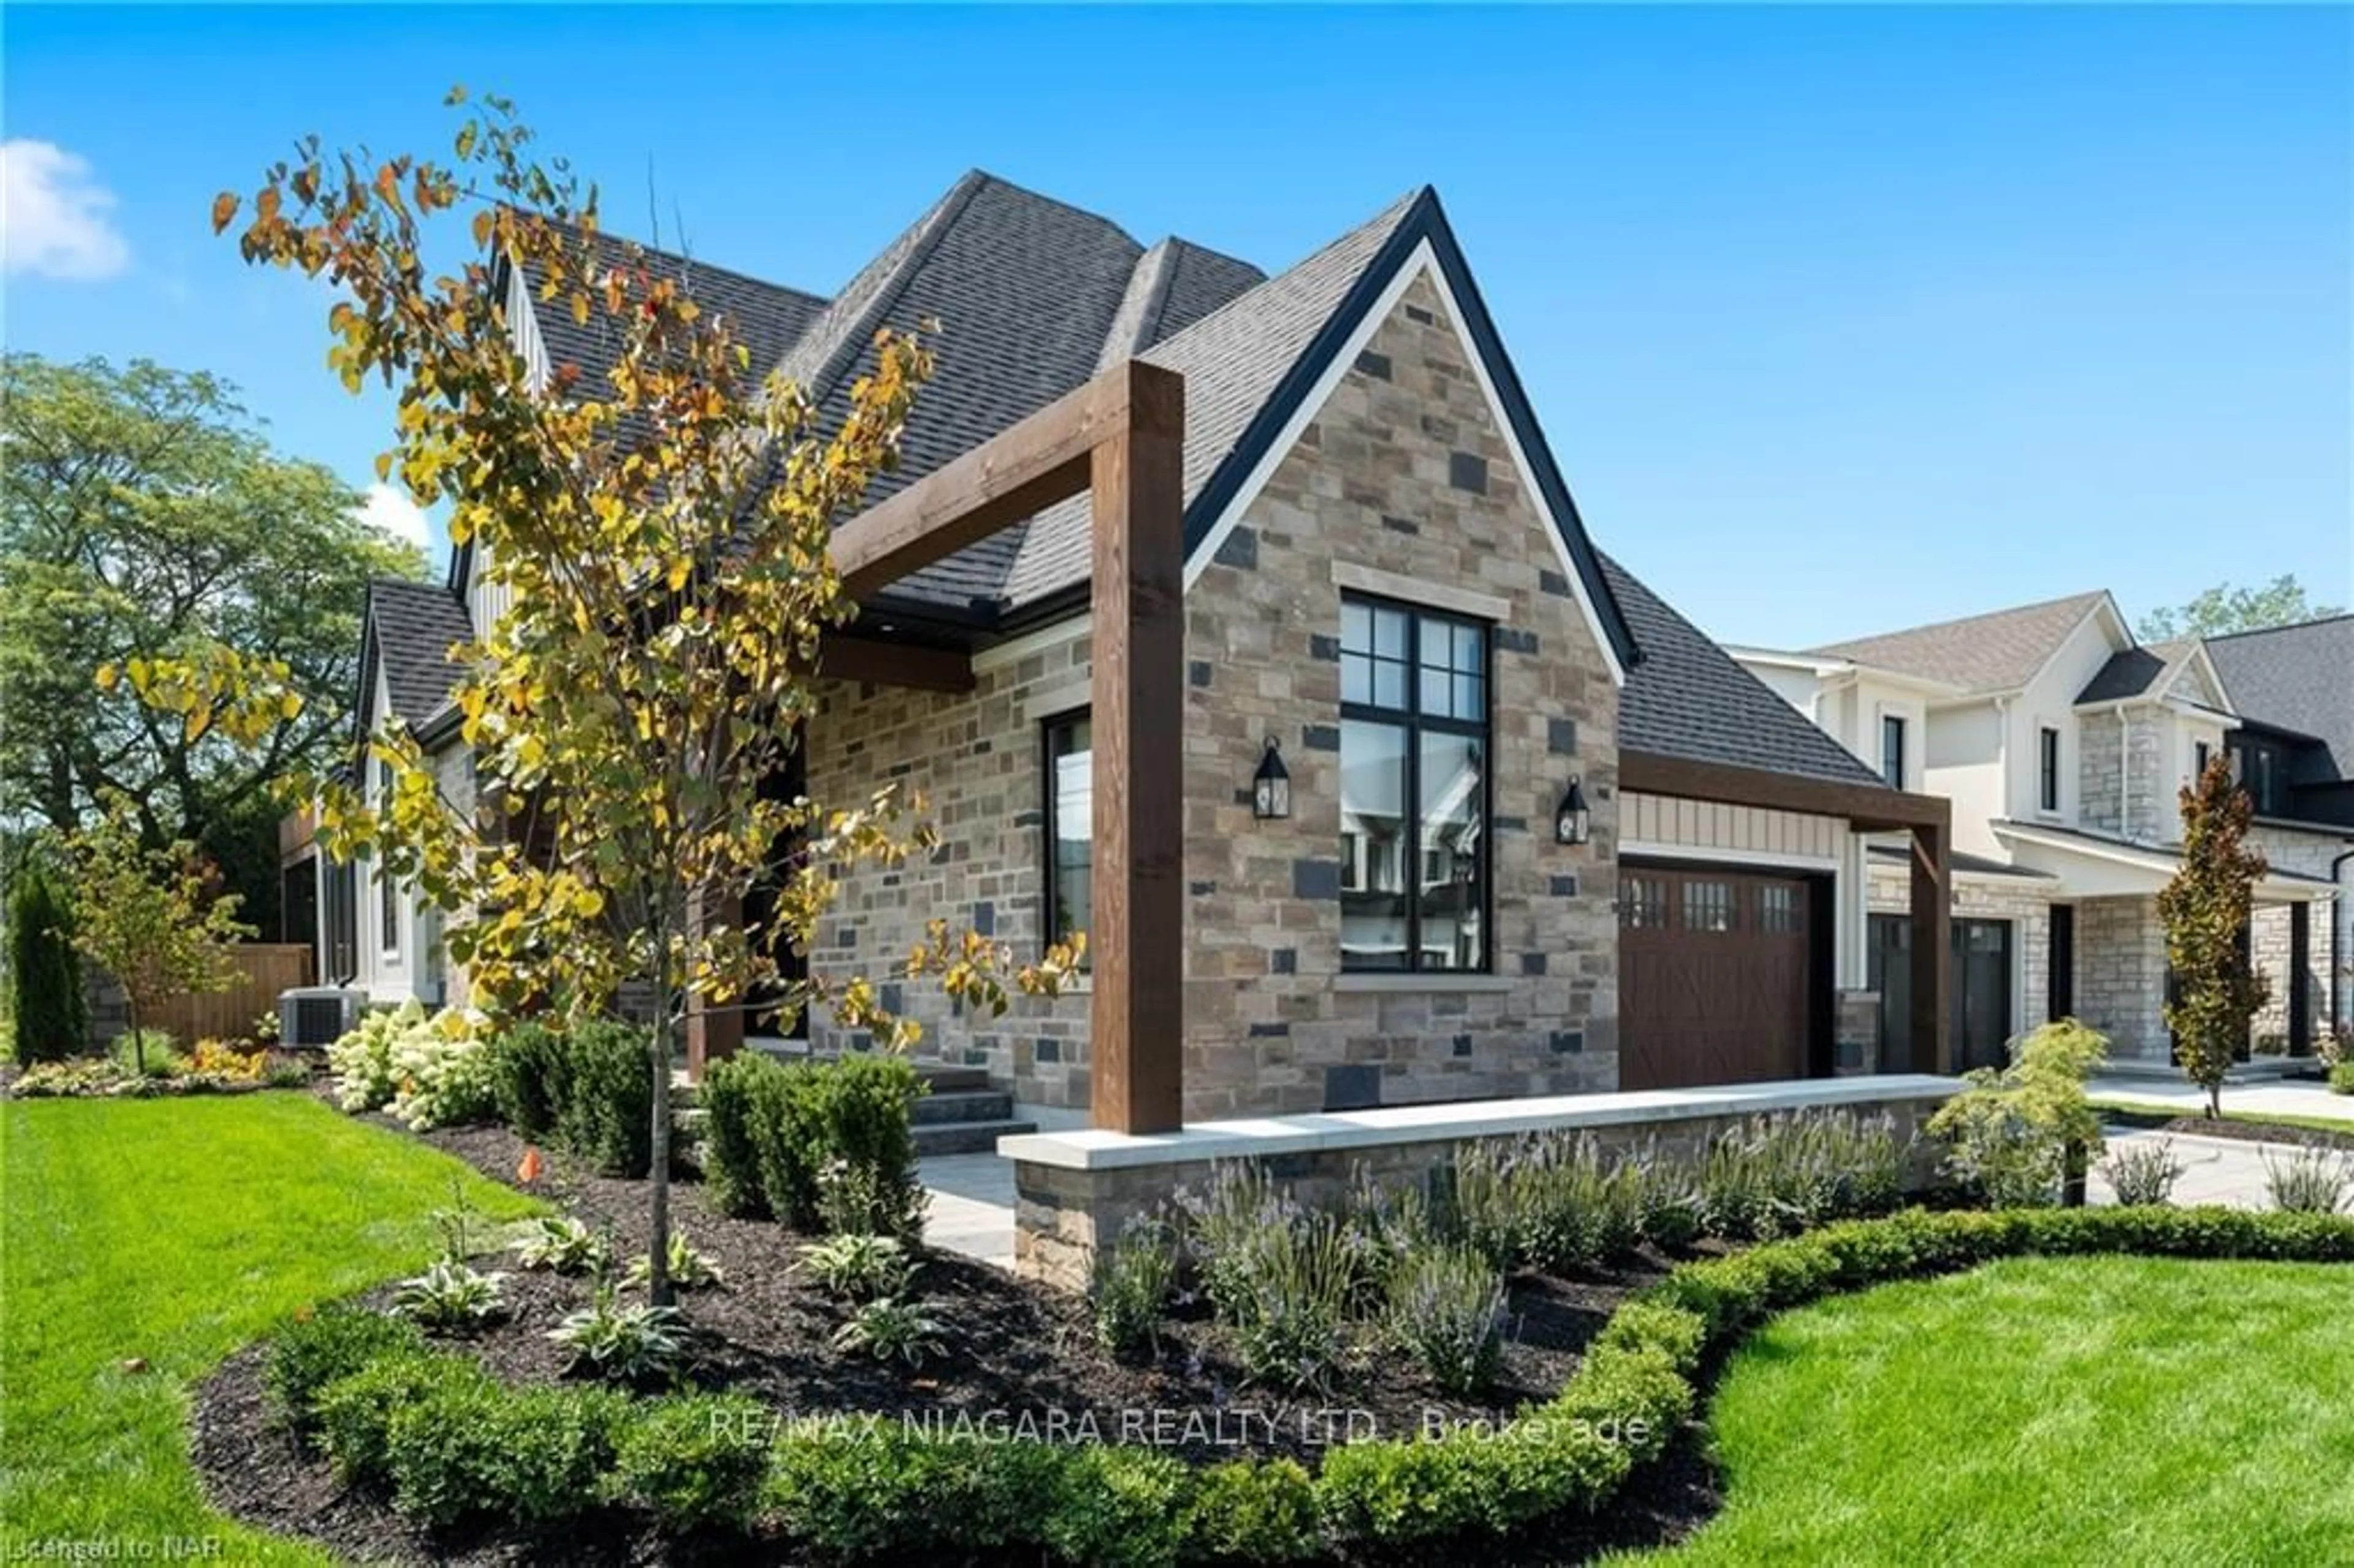 Home with brick exterior material for 110 Millpond Rd, Niagara-on-the-Lake Ontario L0S 1J1